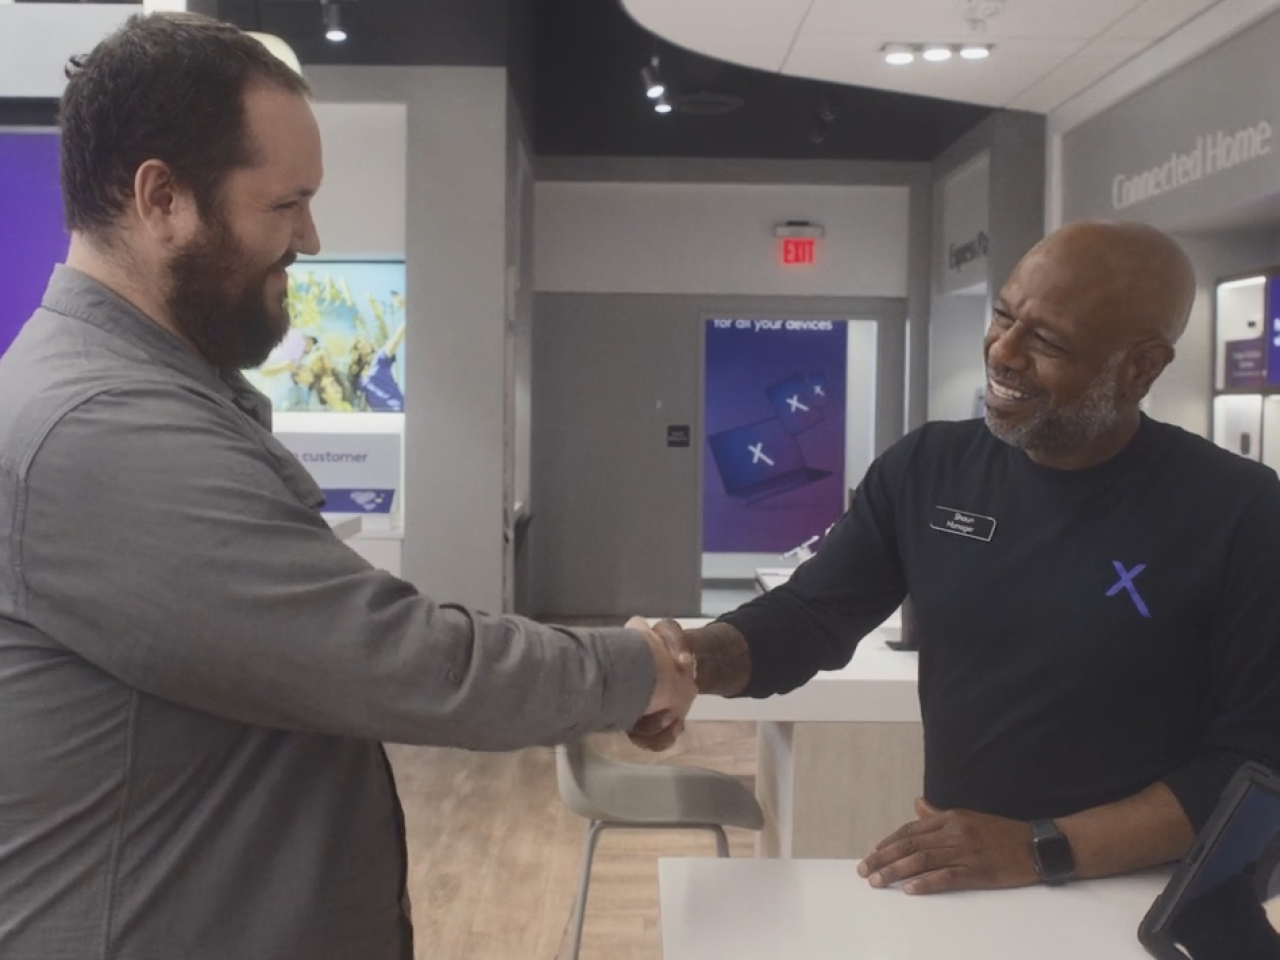 An employee and customer smiling and shaking hands.